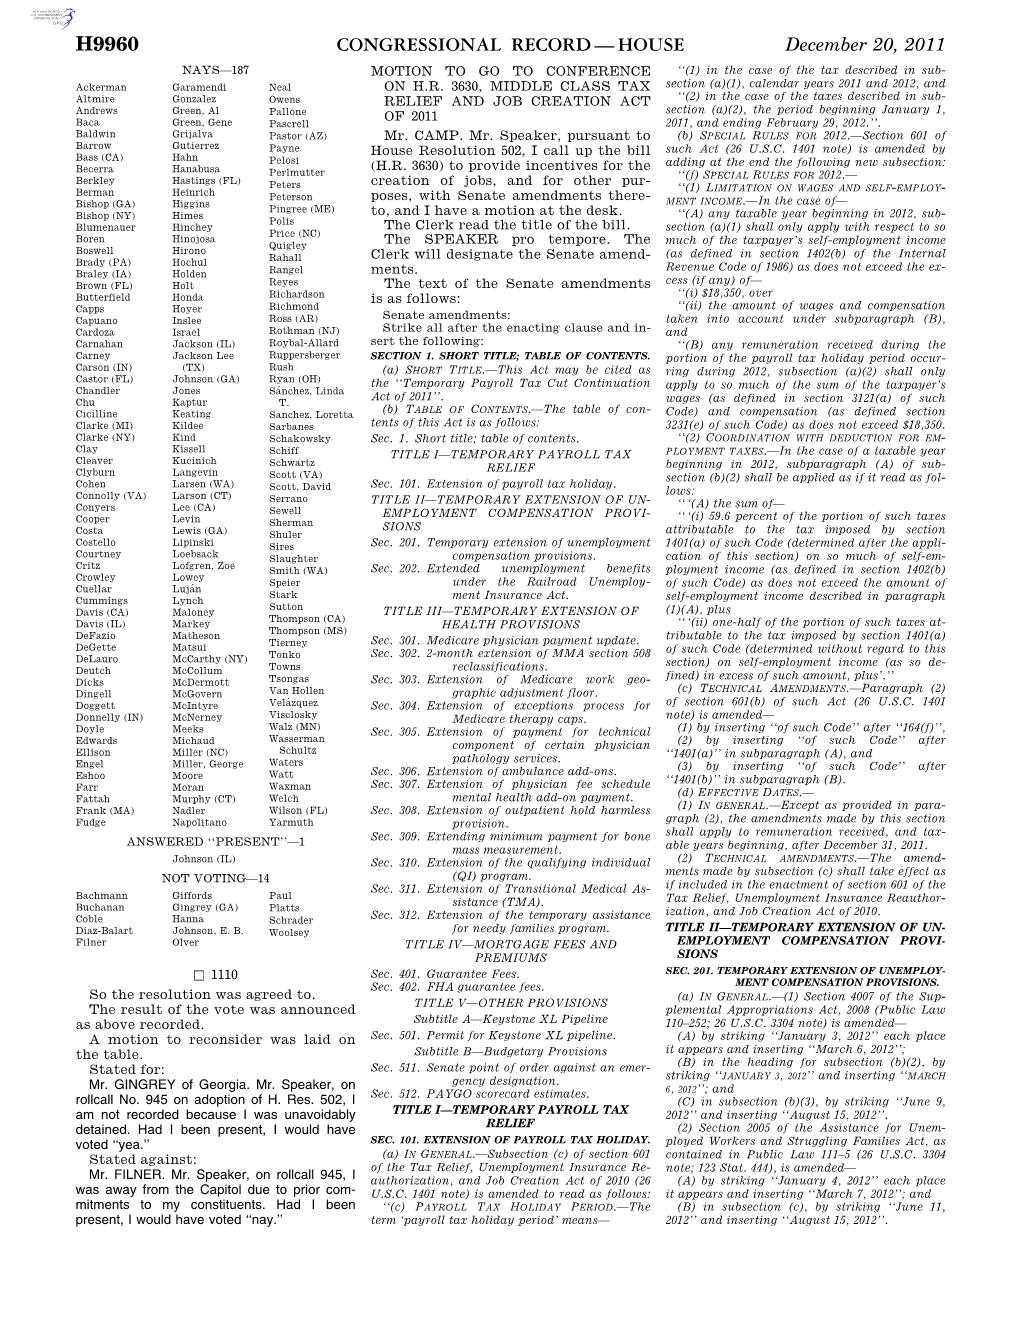 Congressional Record—House H9960